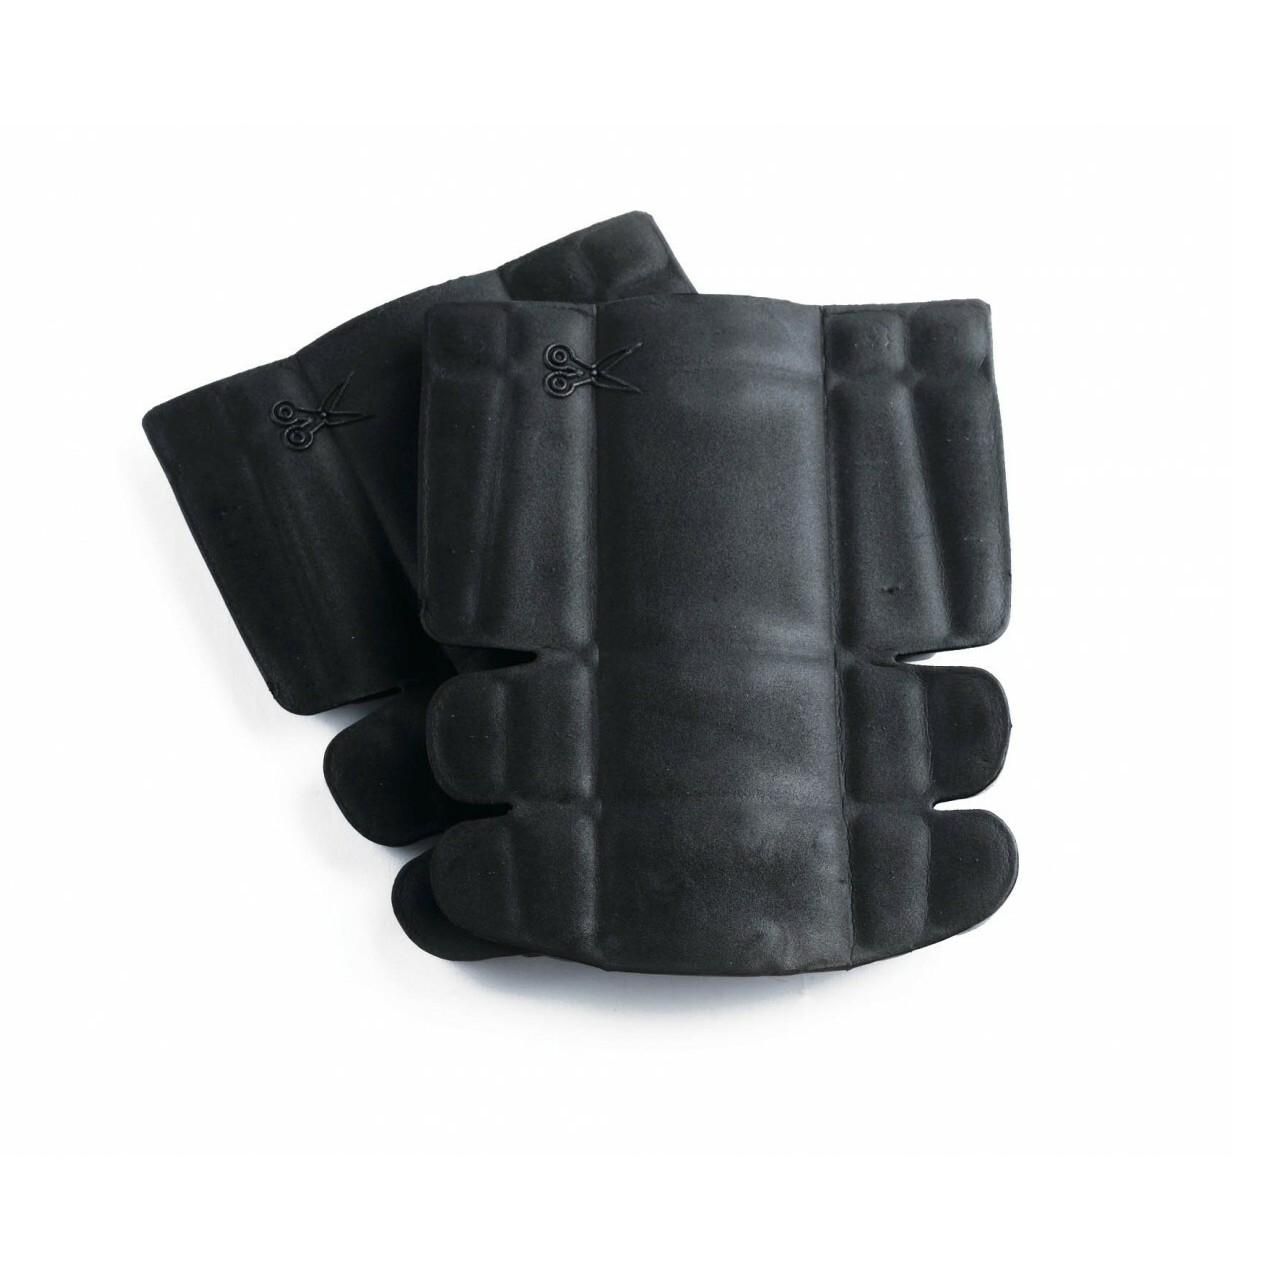 Knee Pad Inserts For Action Trousers | Floormart